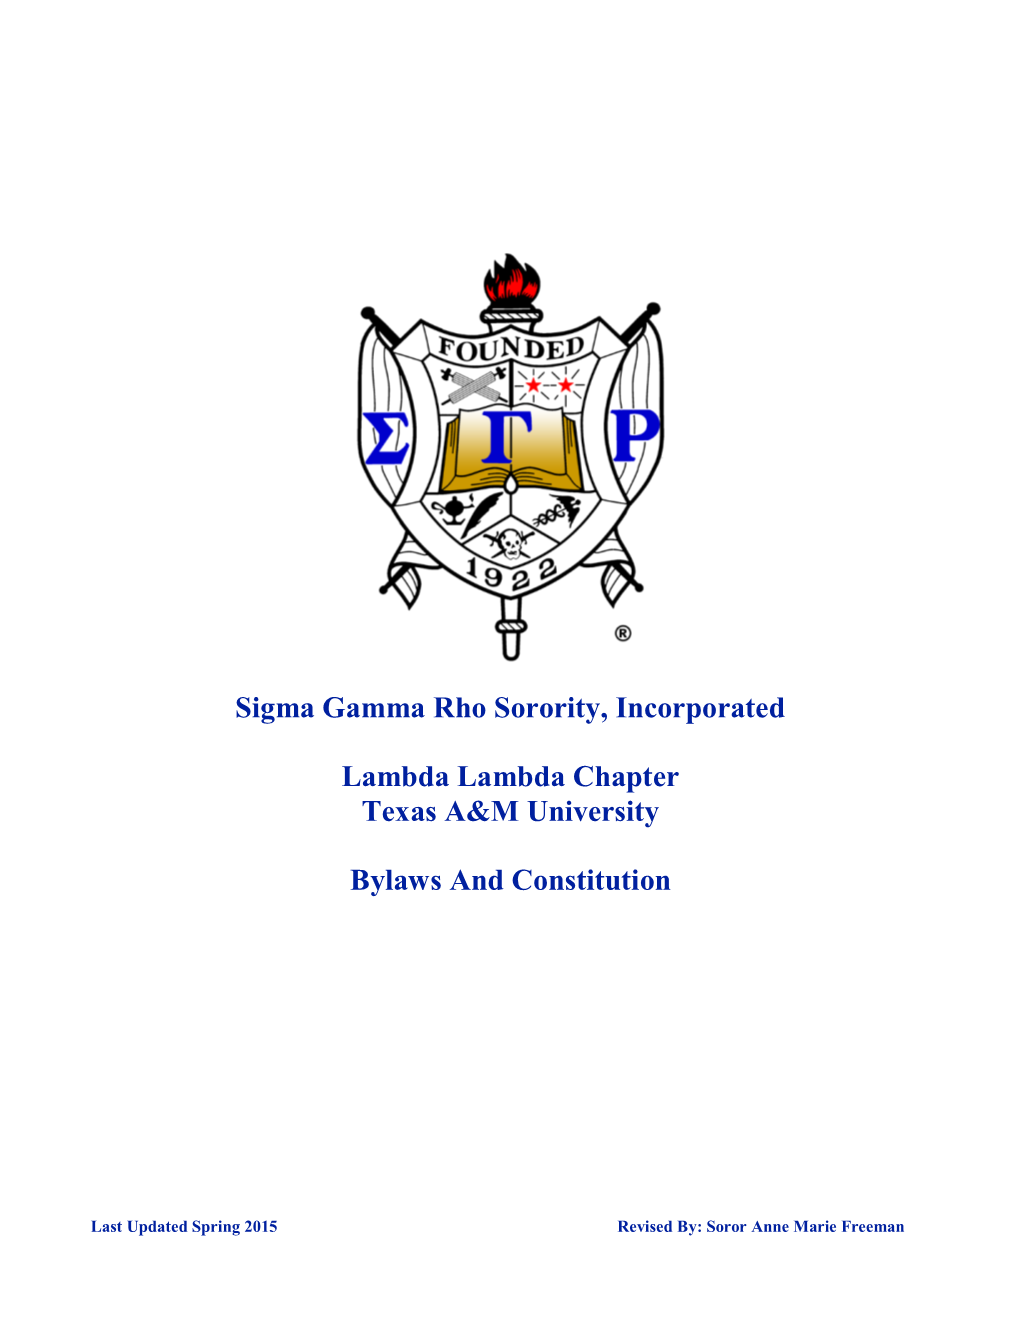 SIGMA GAMMA RHO SORORITY, INC. LAMBDA LAMBDA CHAPTER BY-LAWS “A Non-Governmental Organization Associated with the United Nations Department of Public Information”